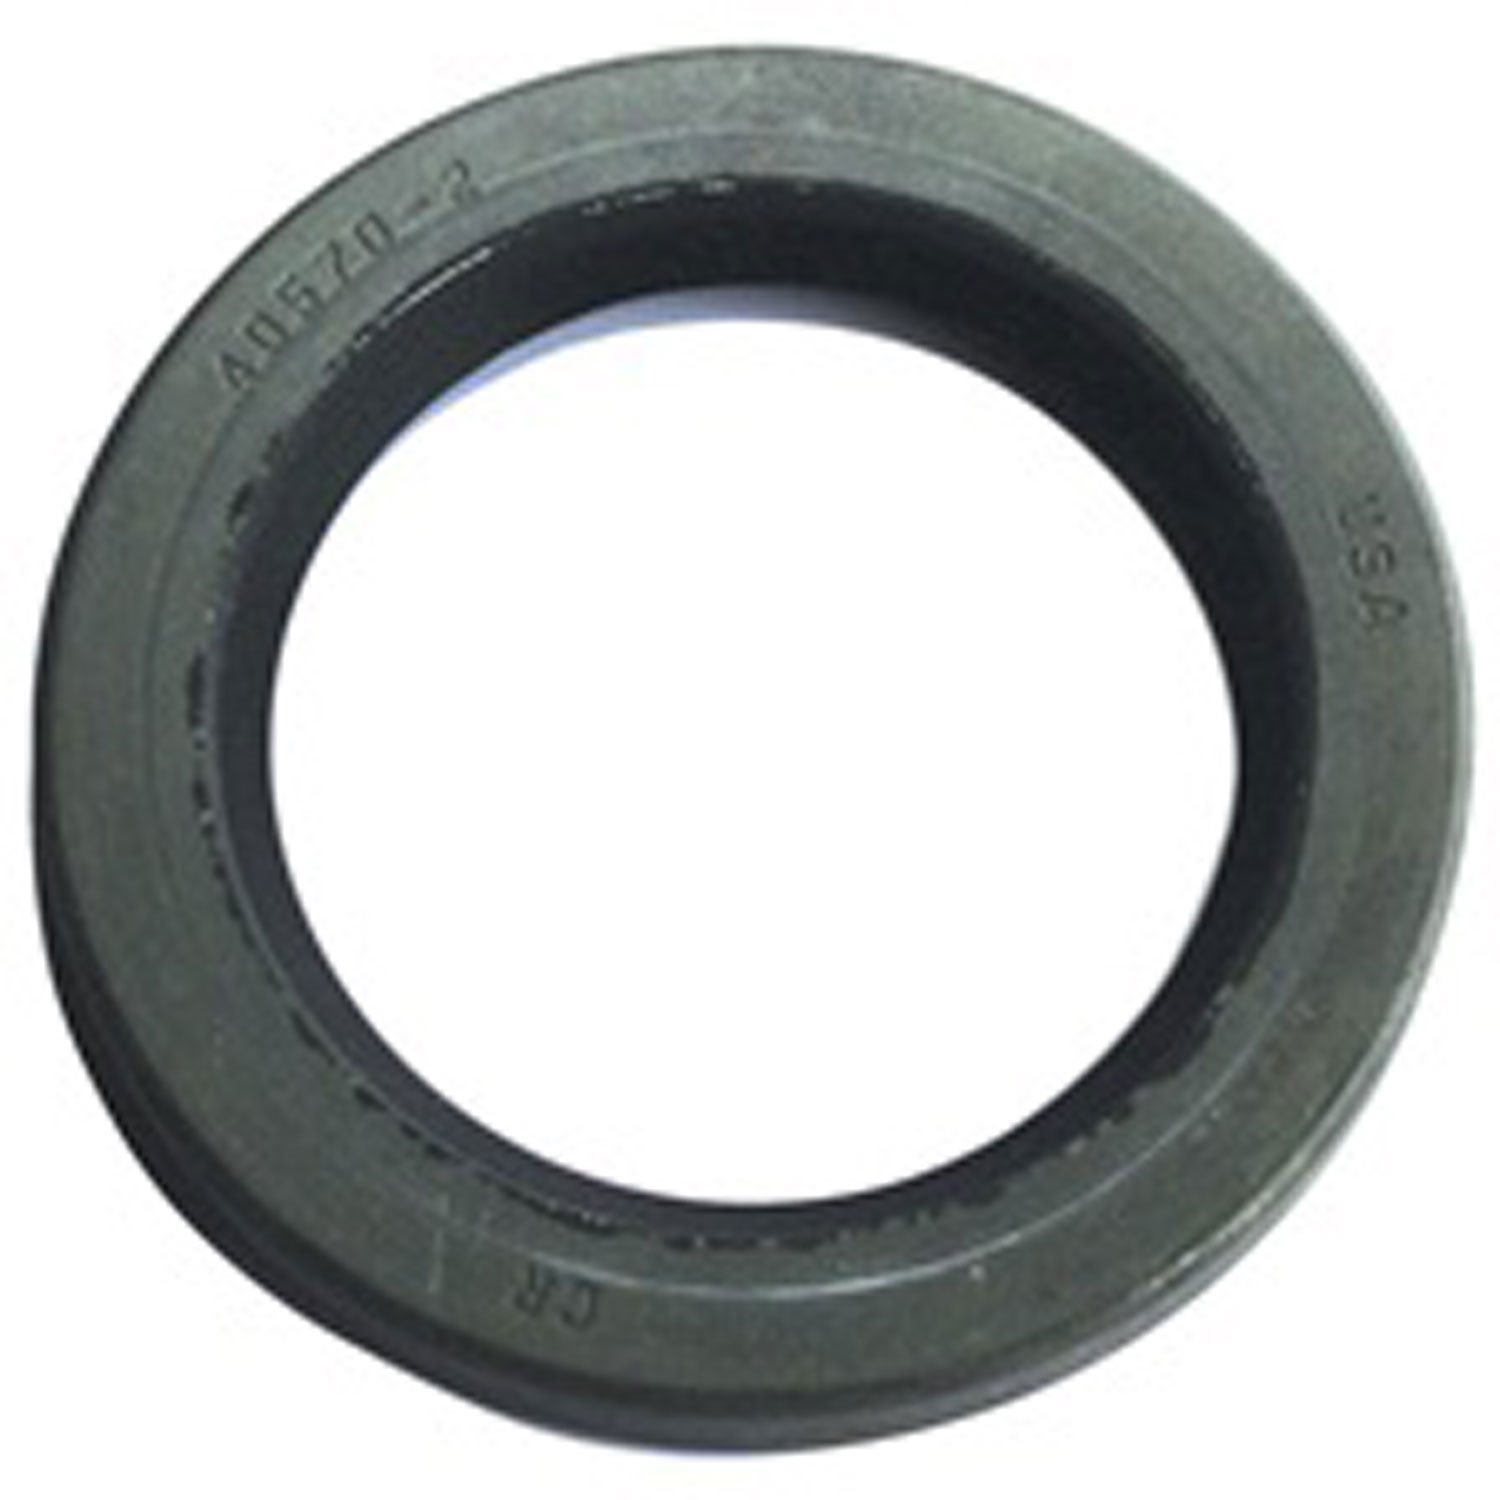 Replacement inner axle oil seal, Fits right side